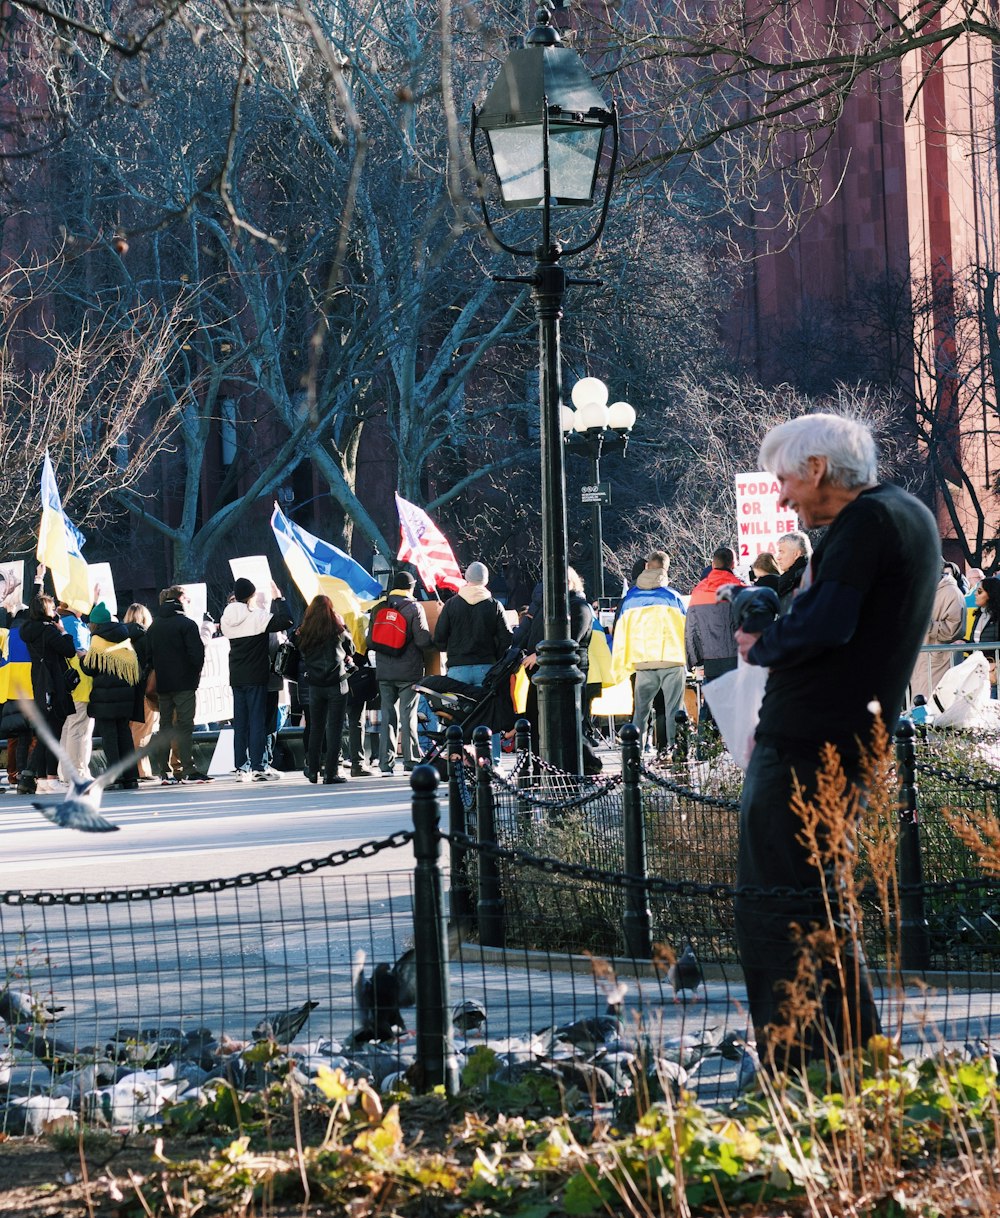 a man standing next to a fence near a crowd of people